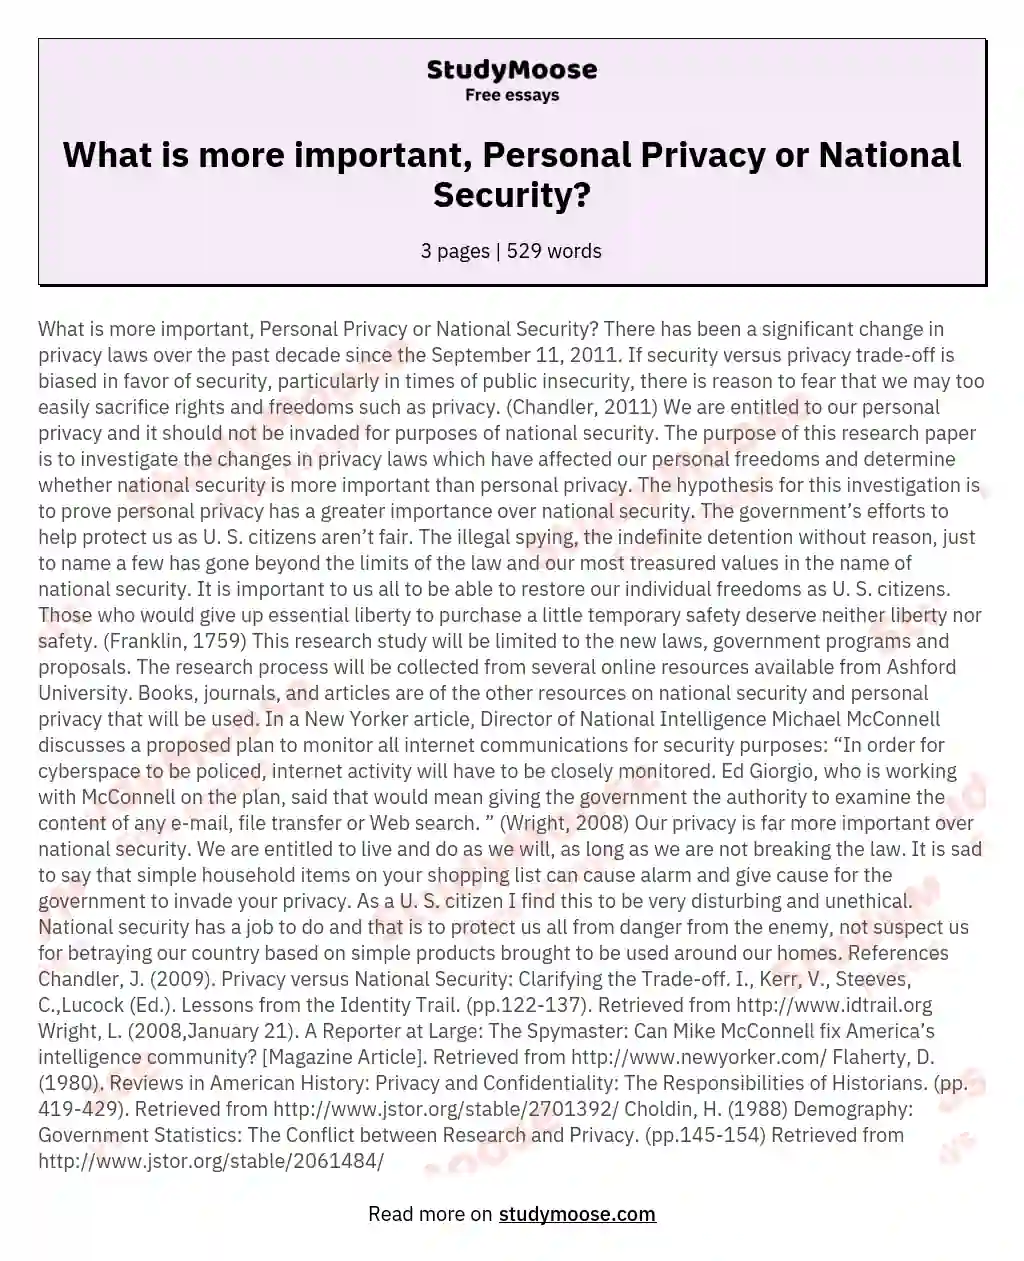 What is more important, Personal Privacy or National Security? essay